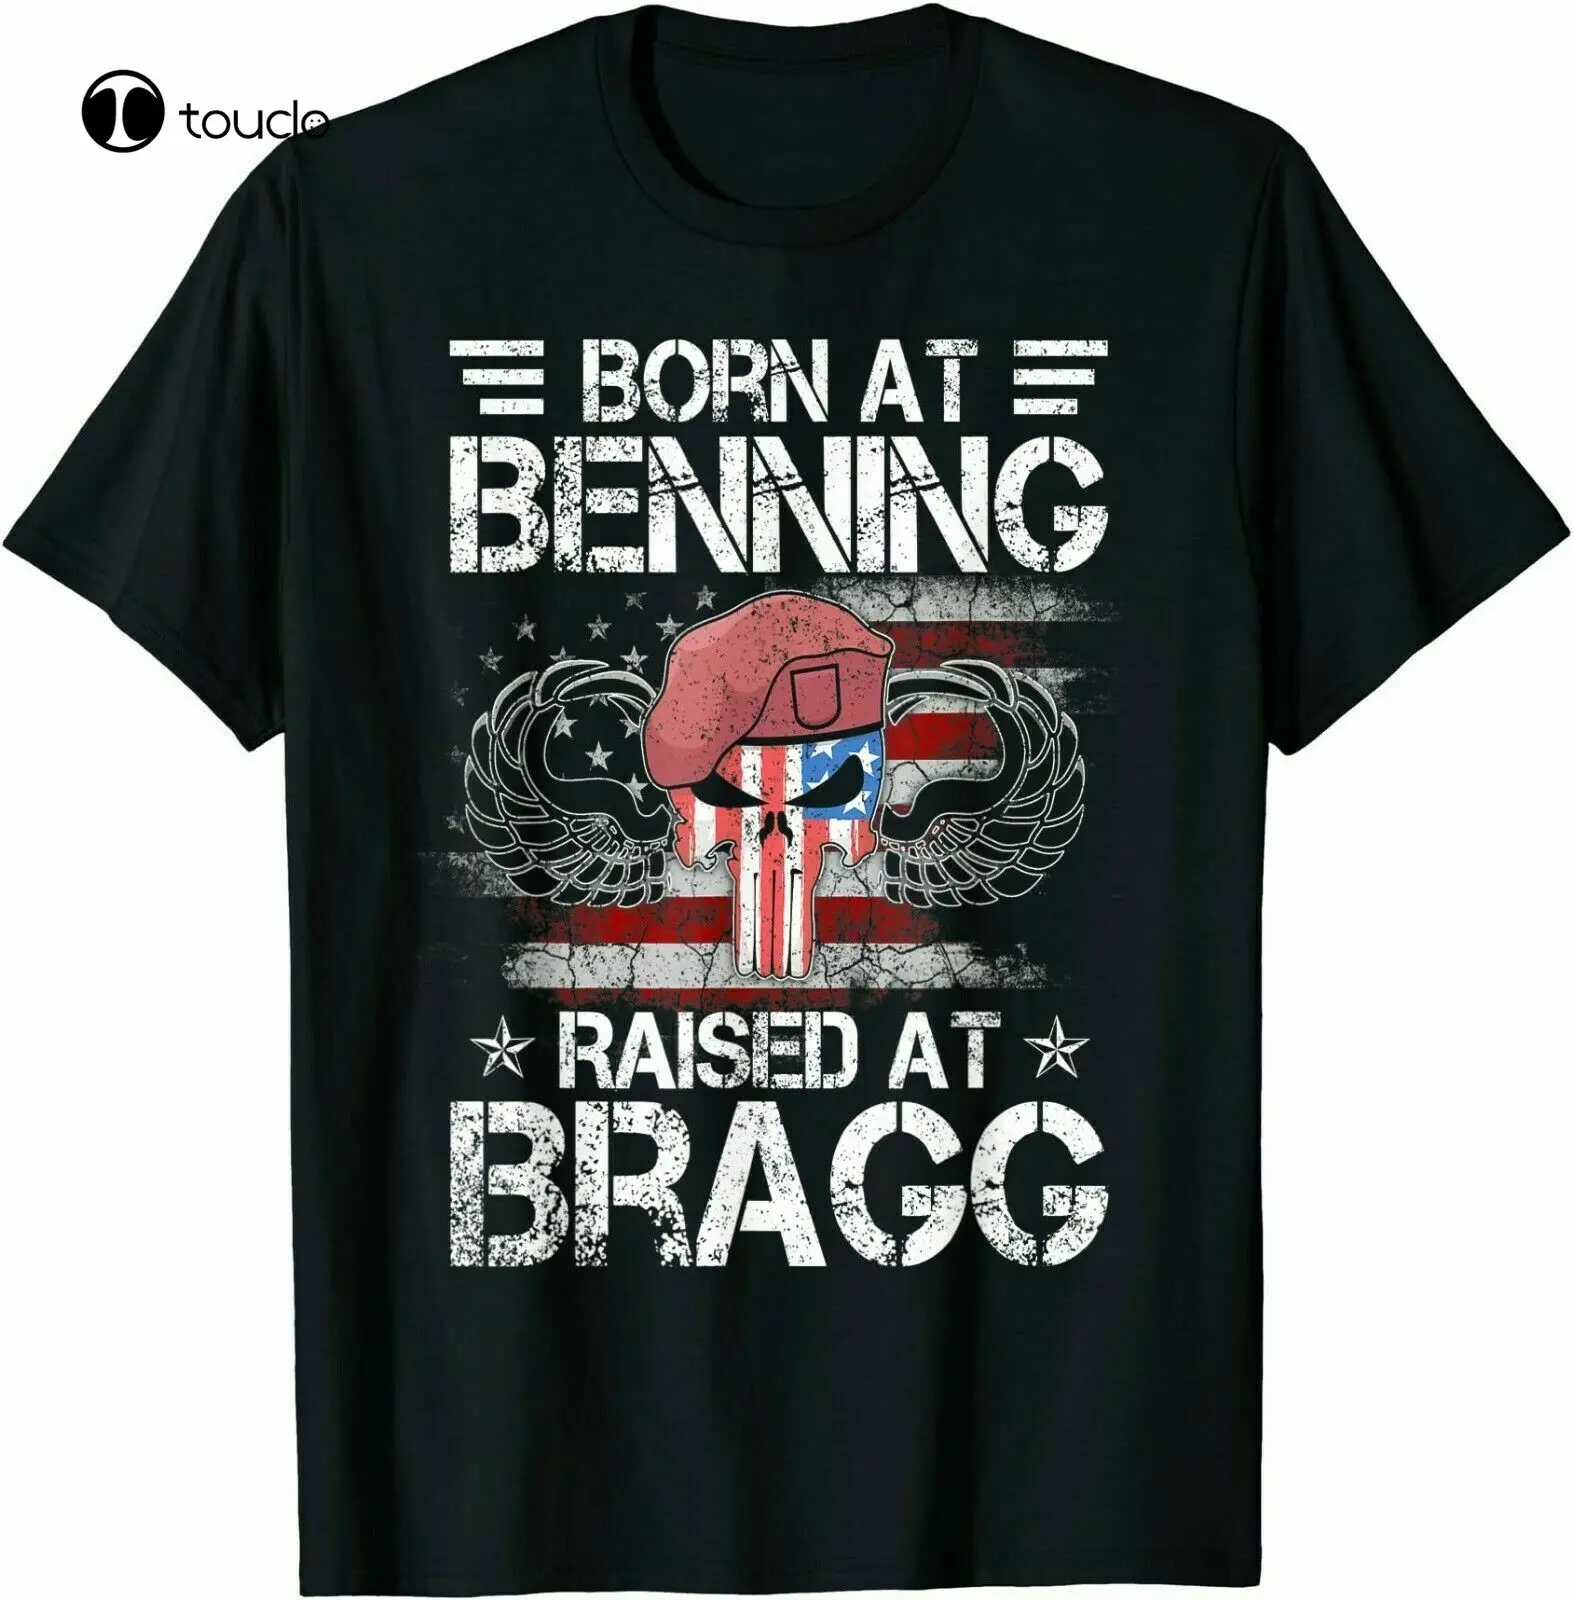 

Born At Ft Benning Raised Fort Bragg Airborne Veterans Day T-Shirt Cotton Trend Tee Shirt Fashion Funny New Xs-5Xl